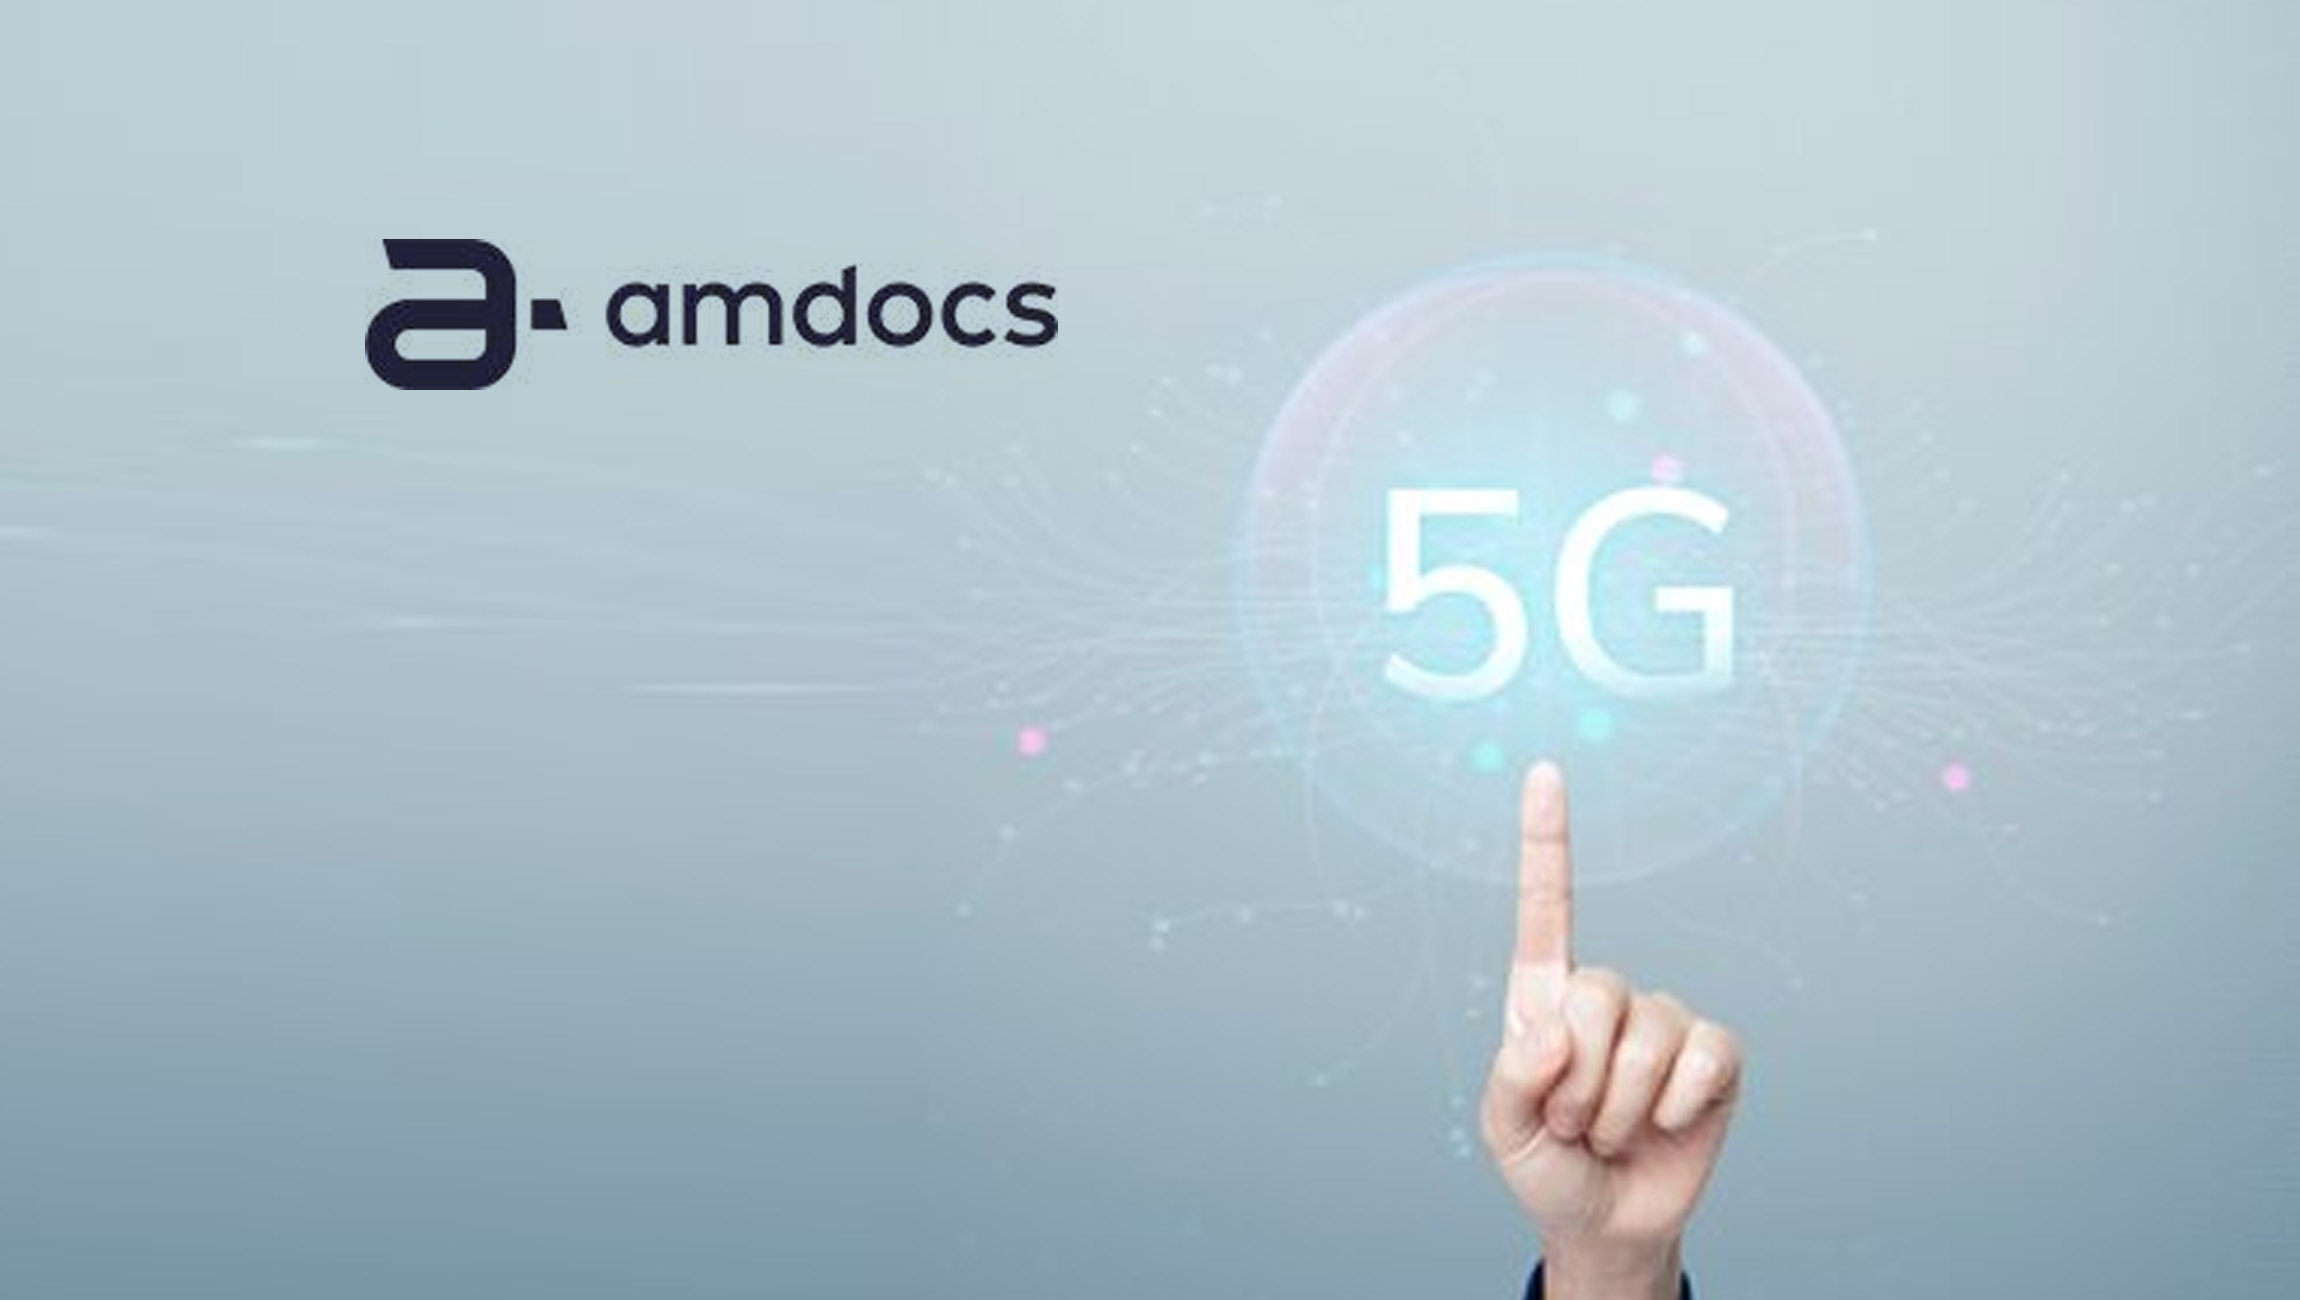 Amdocs-Unveils-Revolutionary_-Flexible-Monetization-Offering-Designed-to-Match-End-Users’-Unique-Needs-in-the-5G-Era